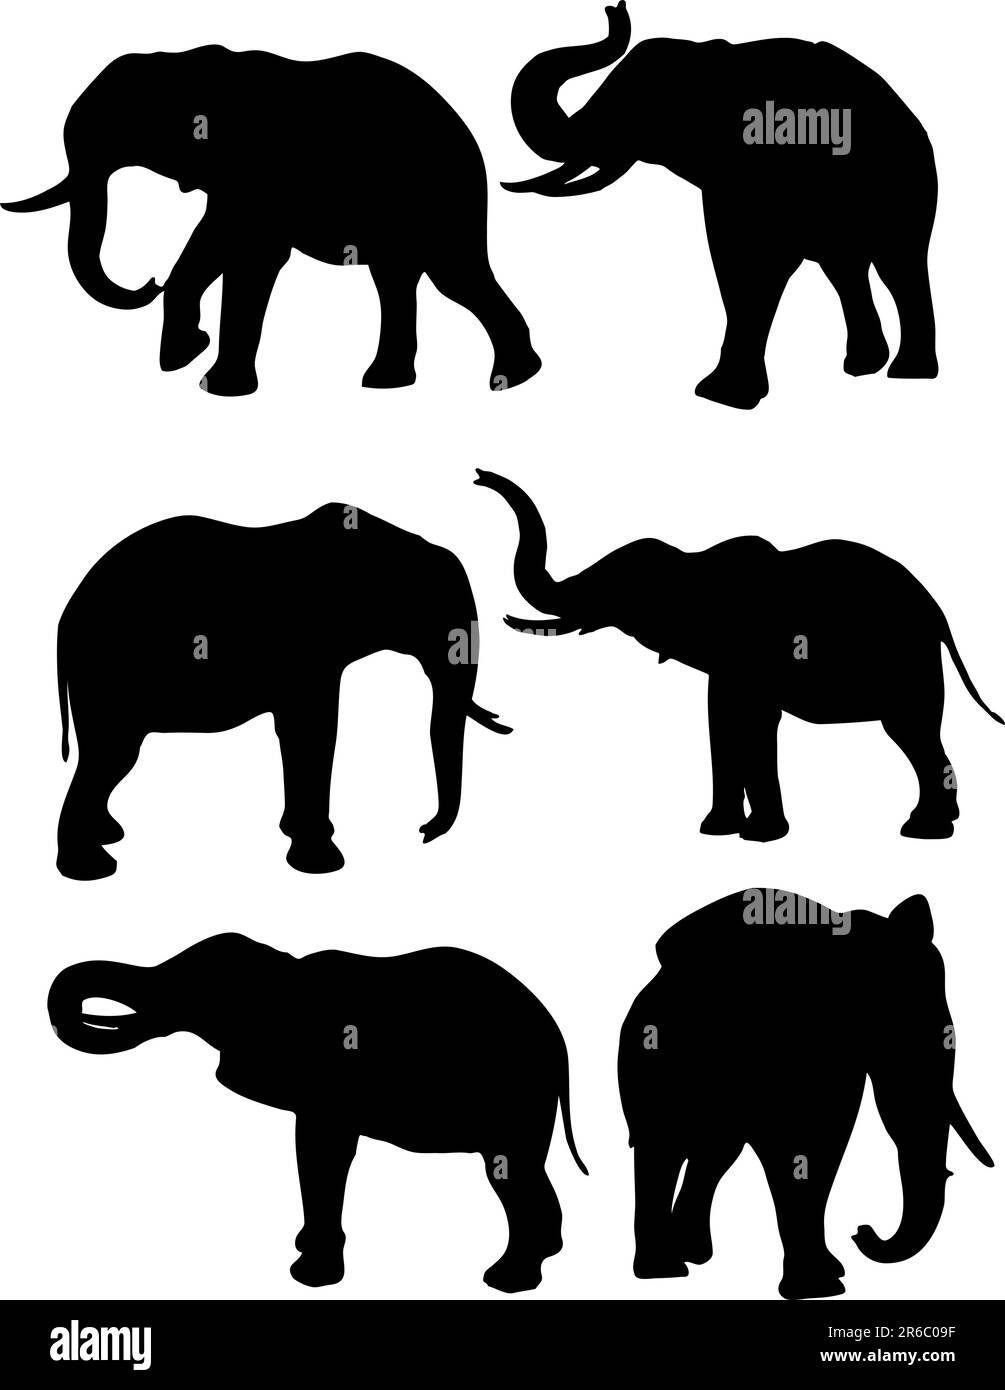 Silhouettes of elephants in different poses Stock Vector